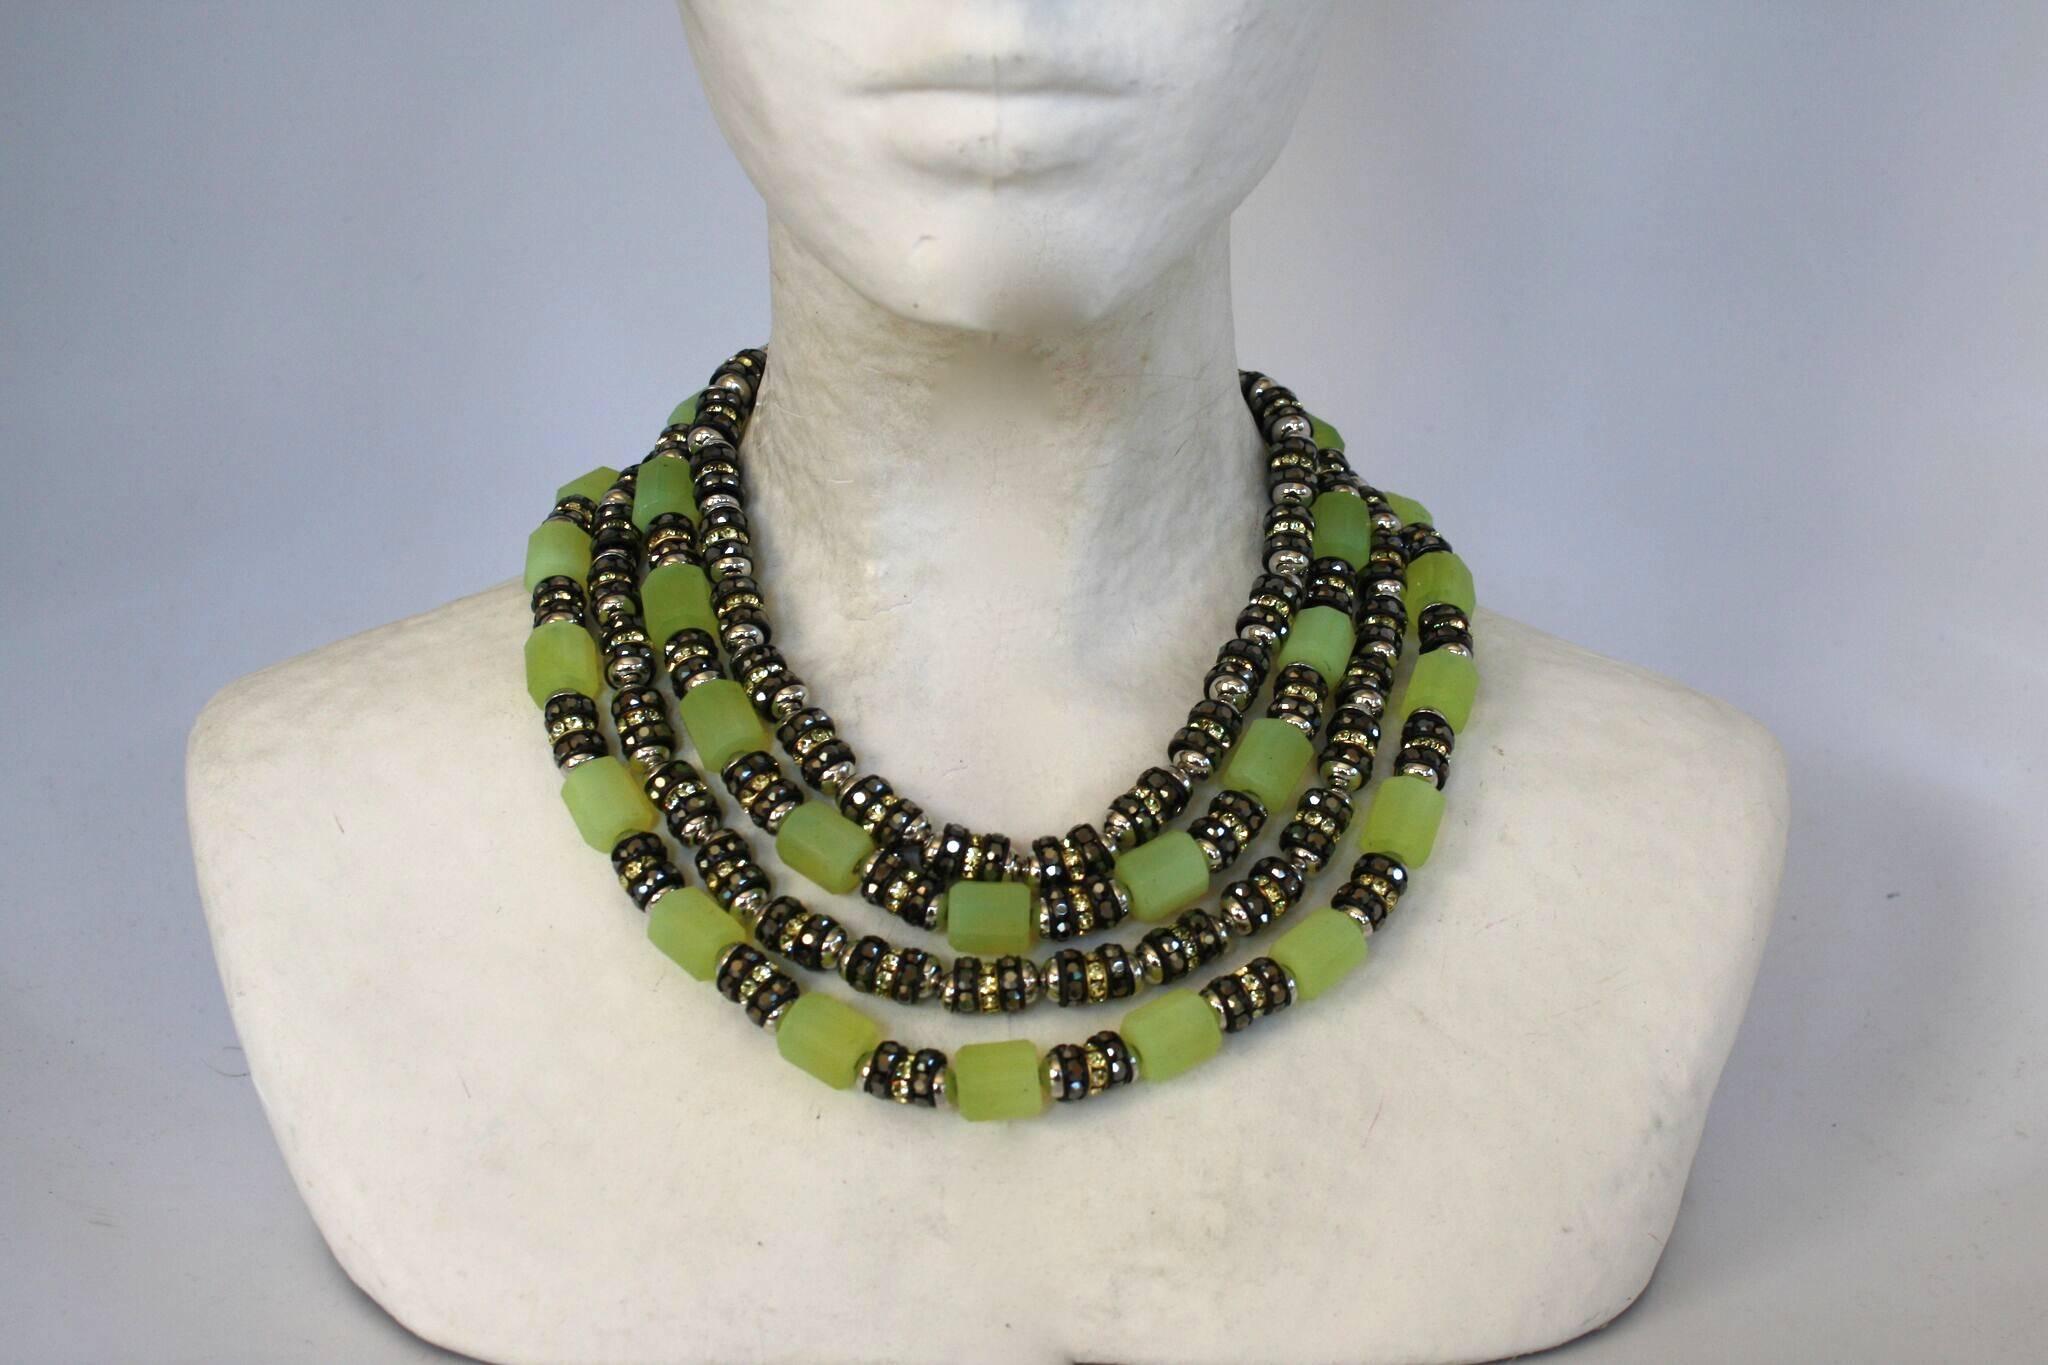 Four rows of gorgeous green vintage glass beads interspersed with Swarovski crystal rondelles from Parisian designer Francoise Montague.   

14